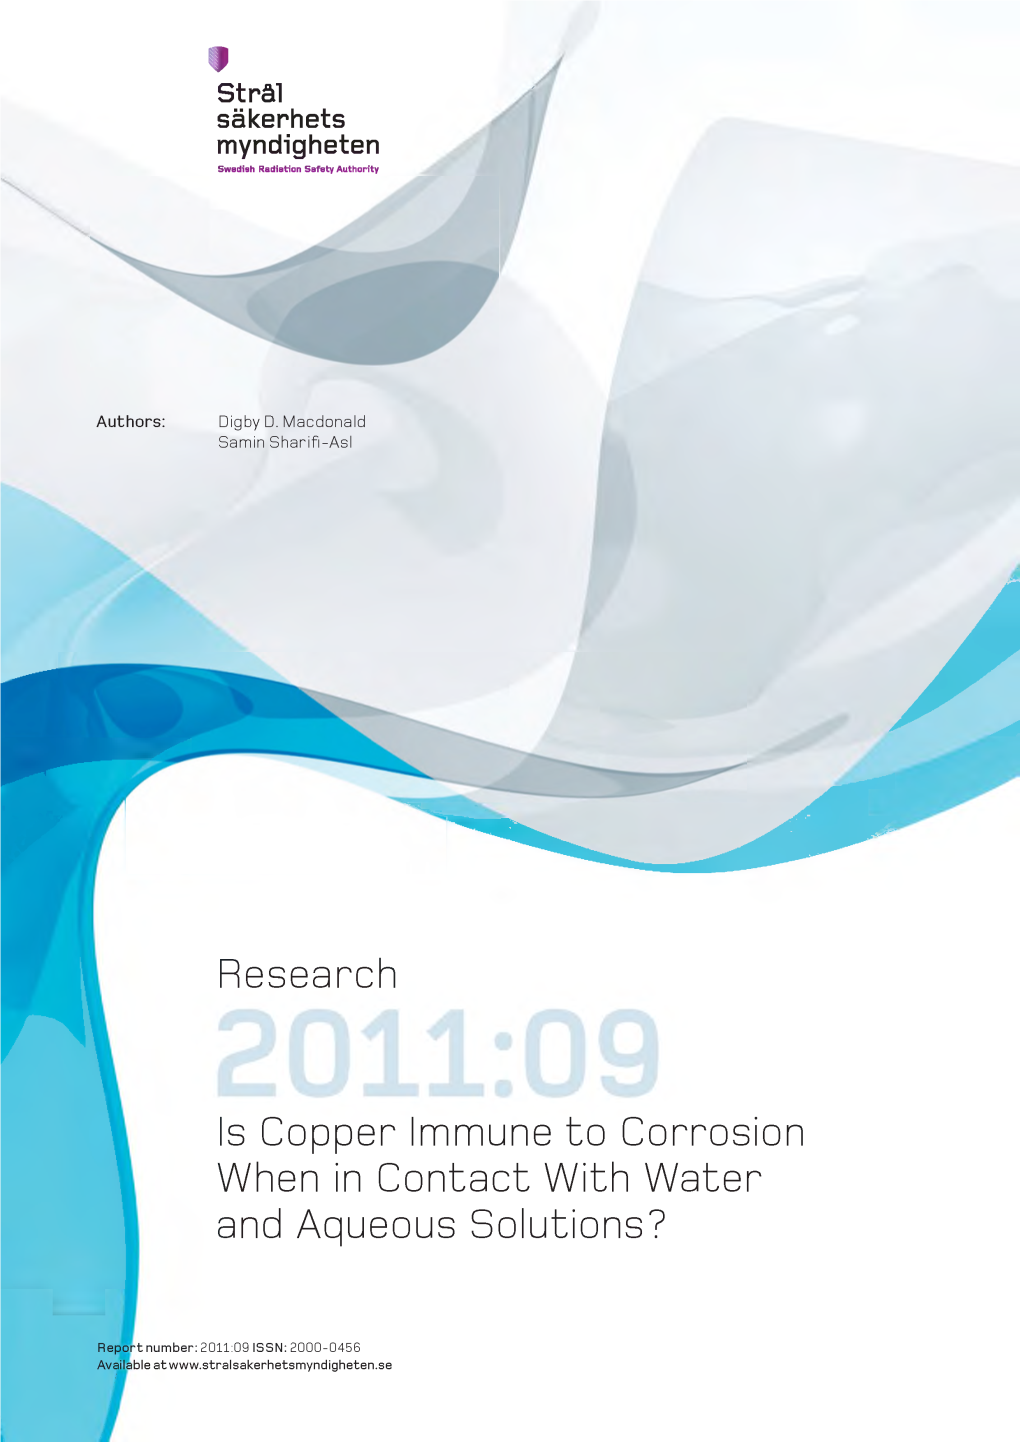 Is Copper Immune to Corrosion When in Contact with Water and Aqueous Solutions?